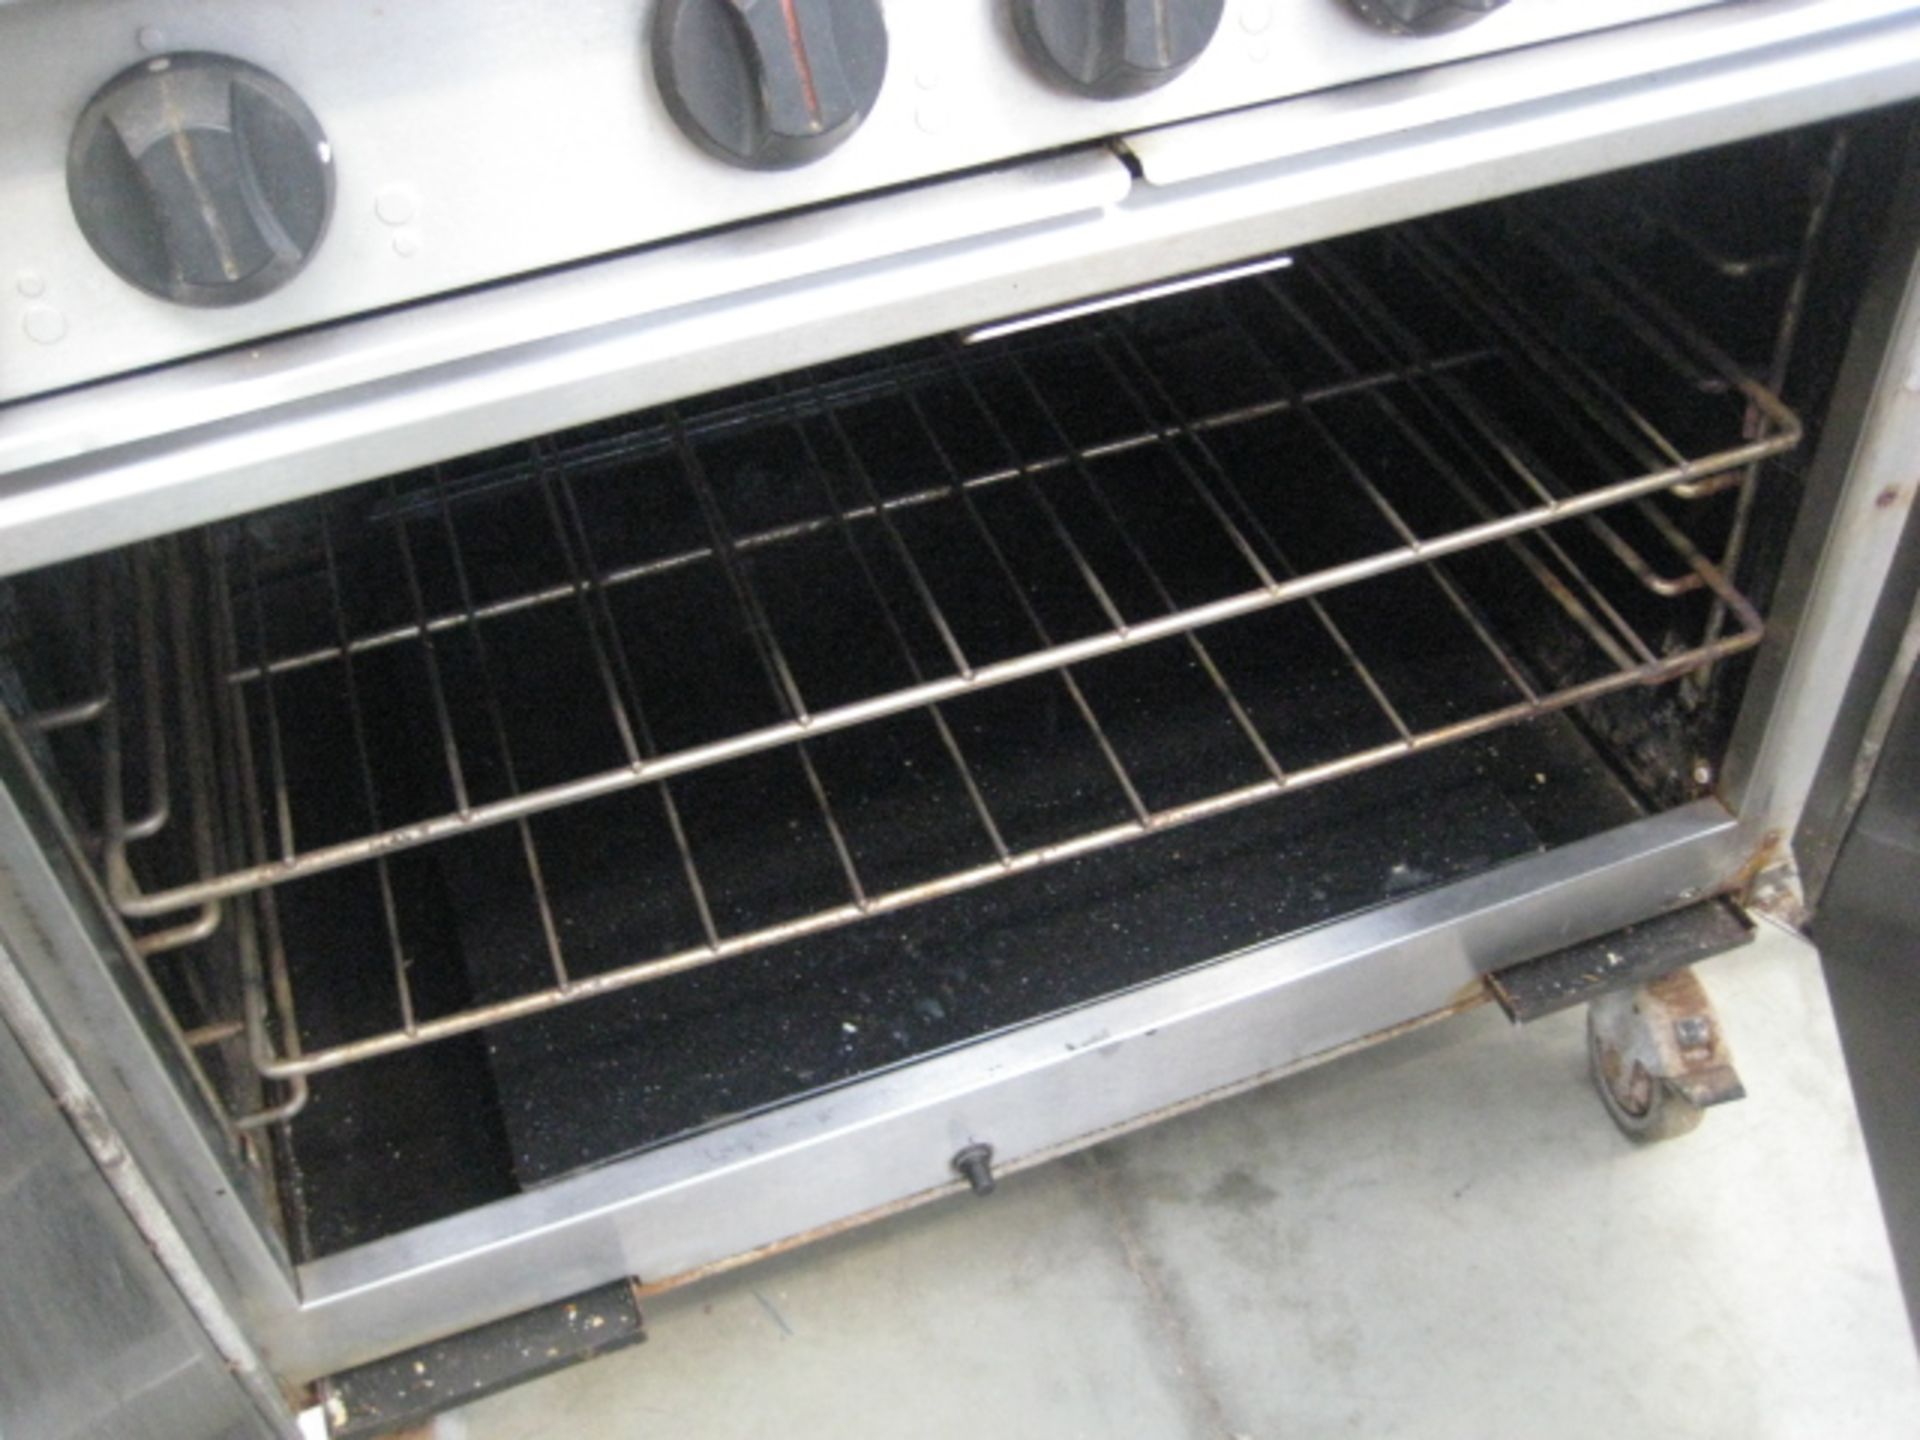 Falcon double door gas oven with 6 burner hob - Image 3 of 3